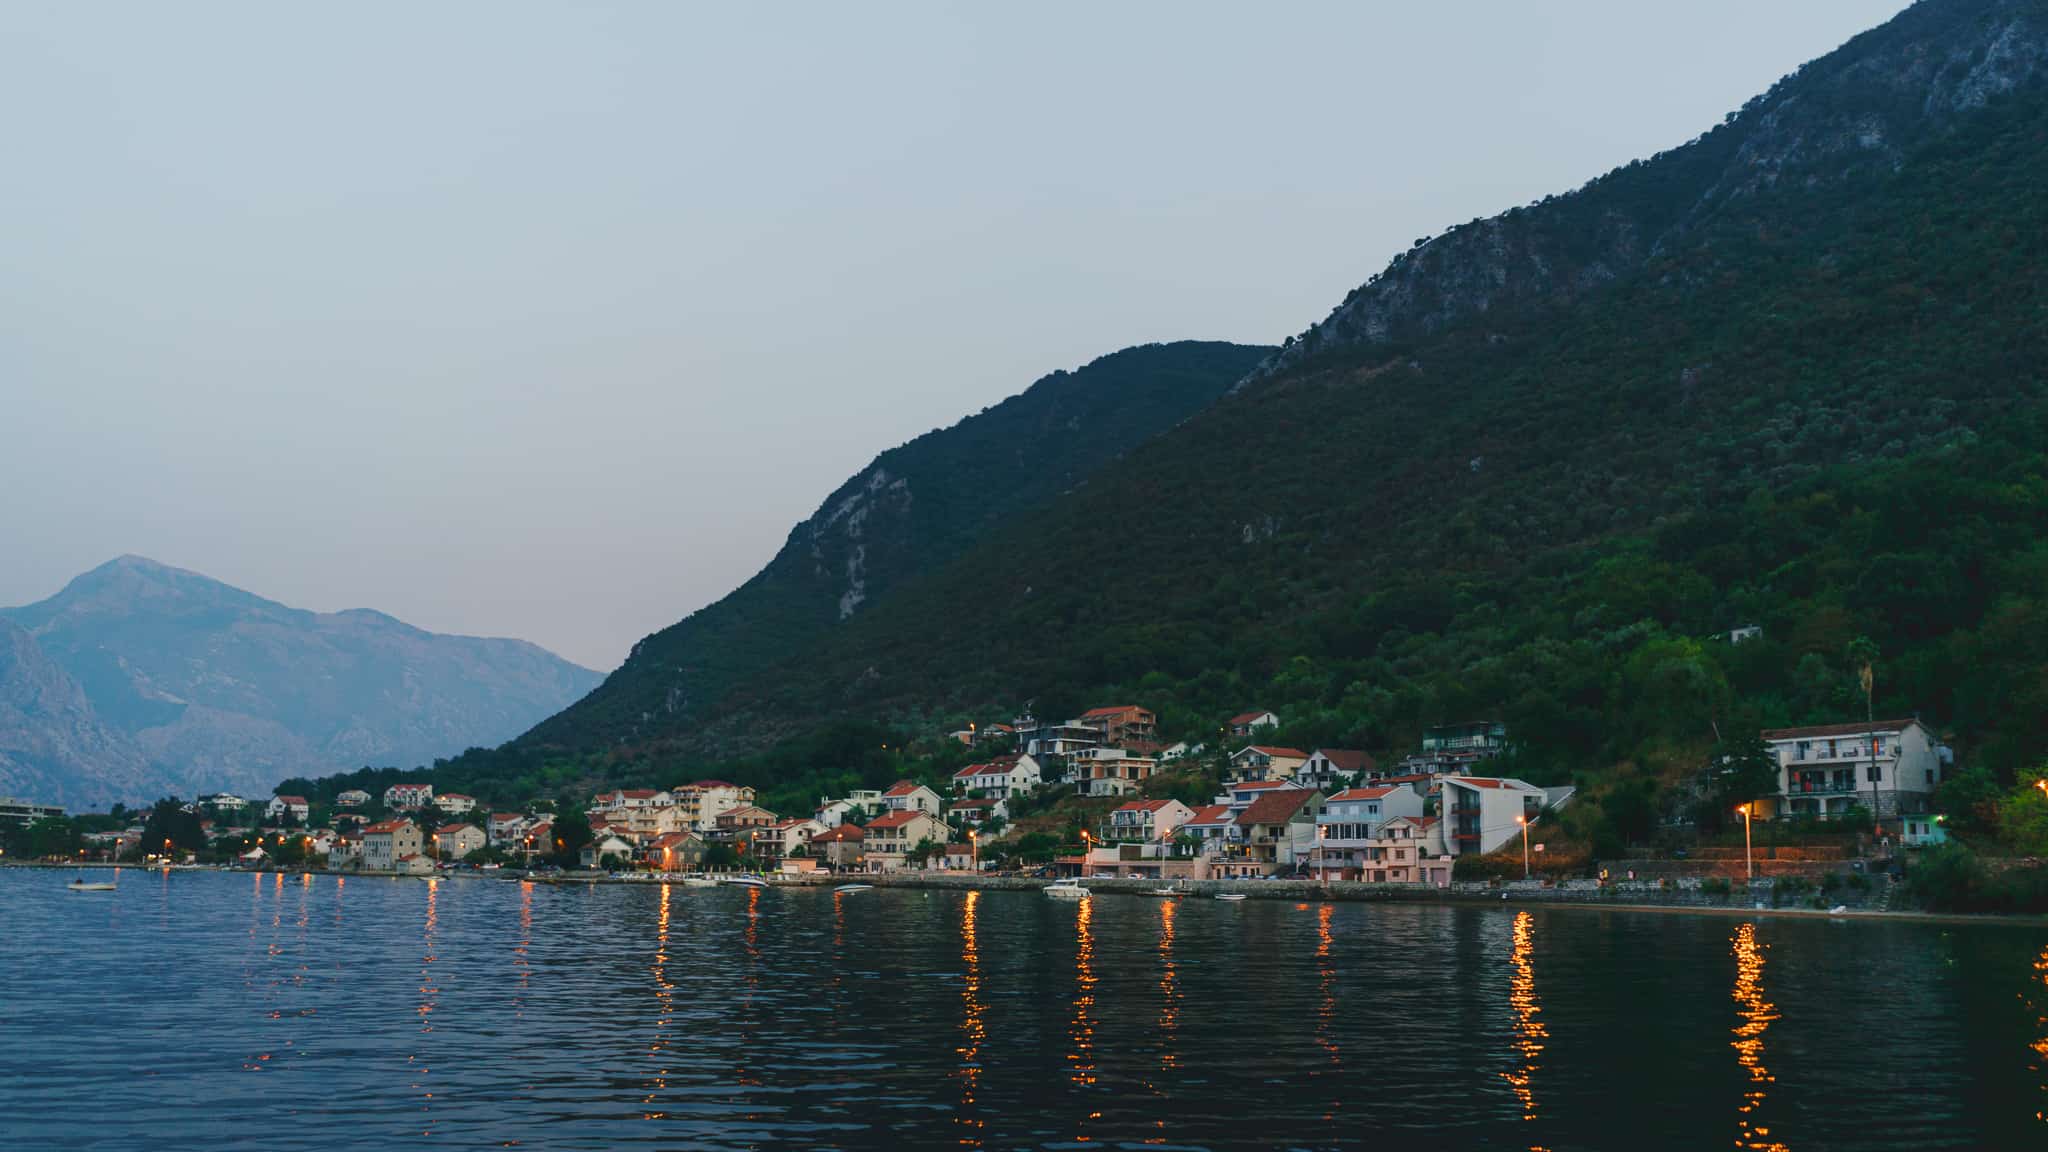 Buildings on the hillside of the bay of  Kotor in Montenegro shot at blue hour with their warm street lights glistening in the water